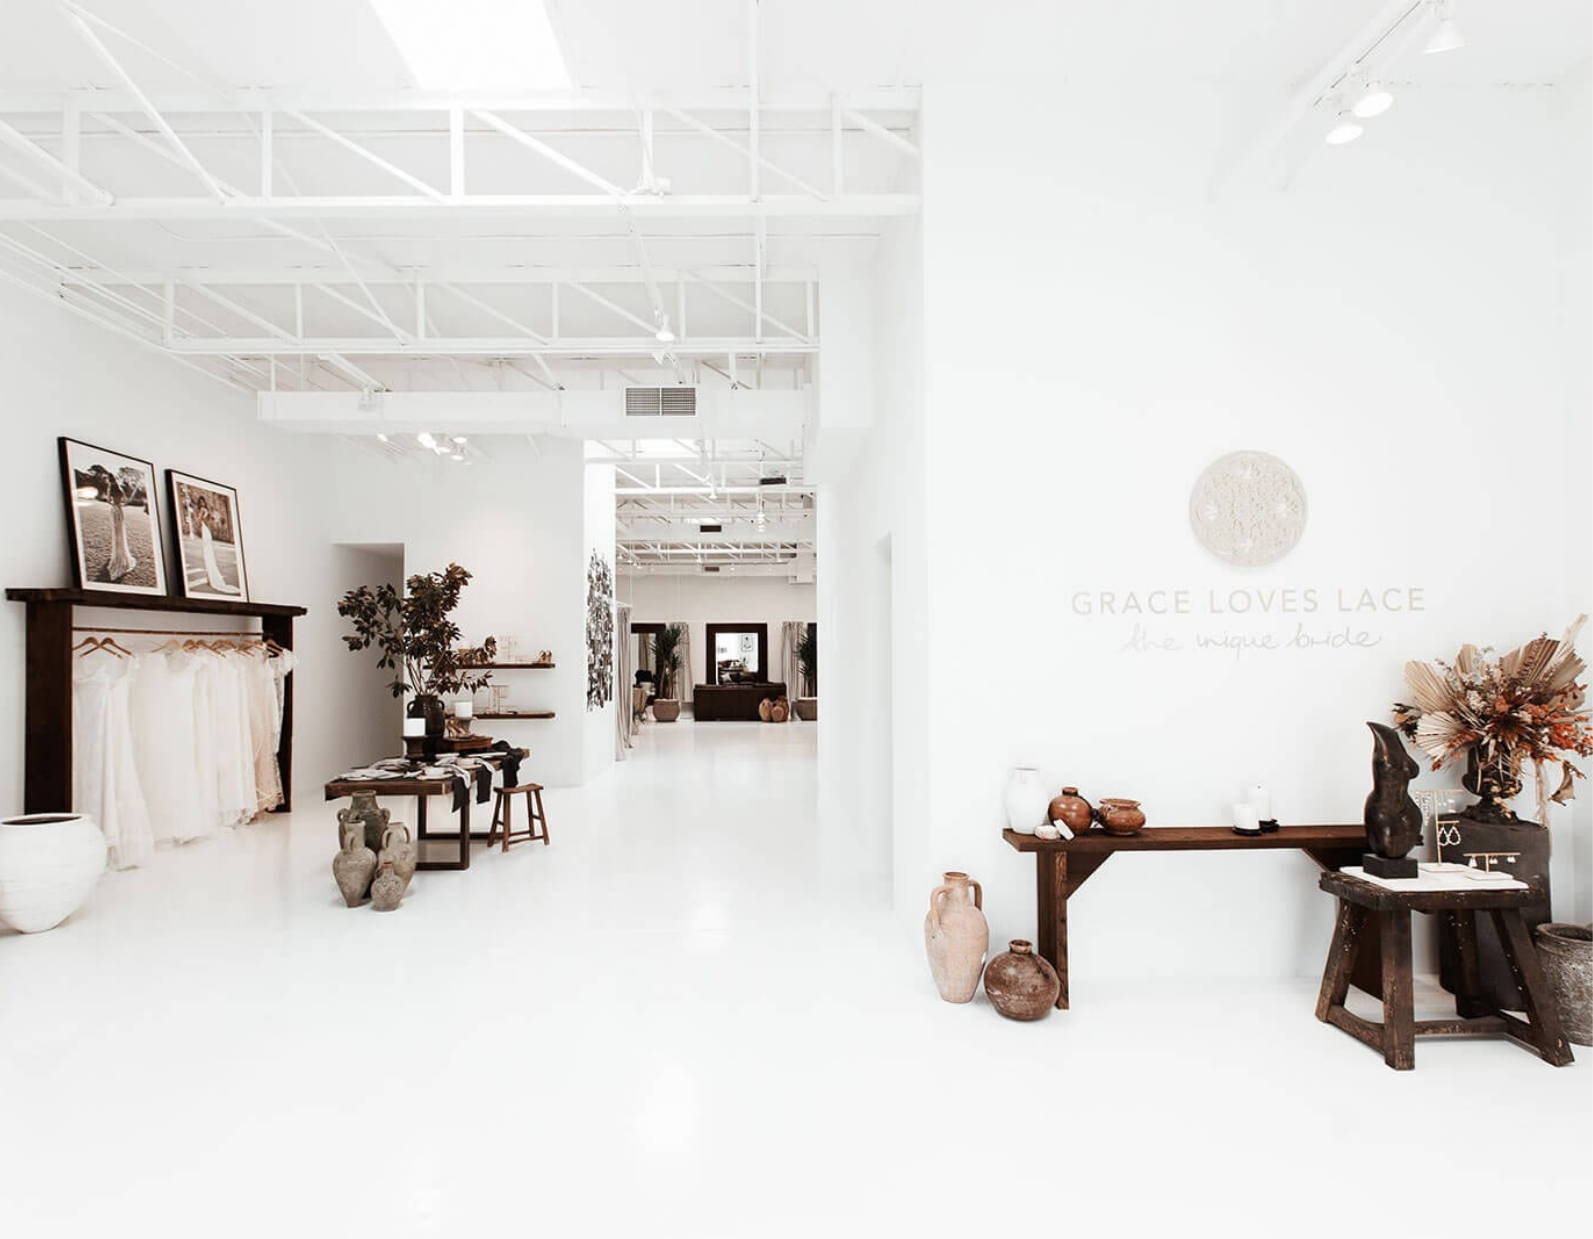 The Grace Loves Lace luxurious Dallas showroom